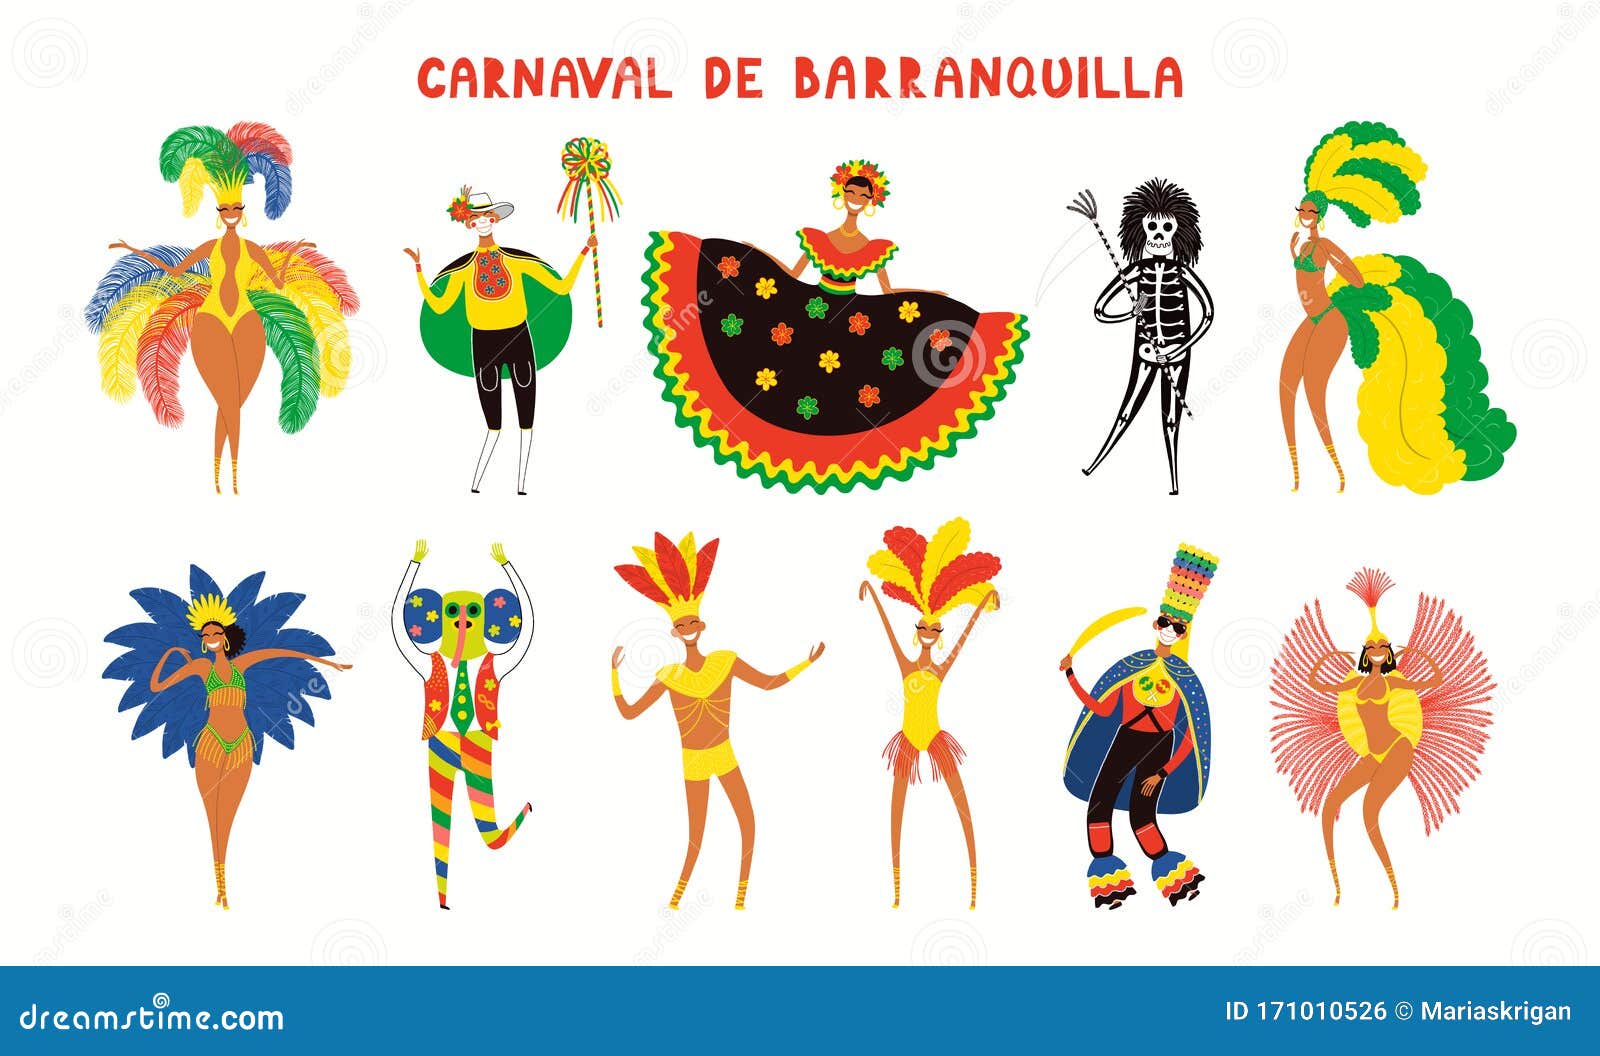 carnival of barranquilla people in costumes collection